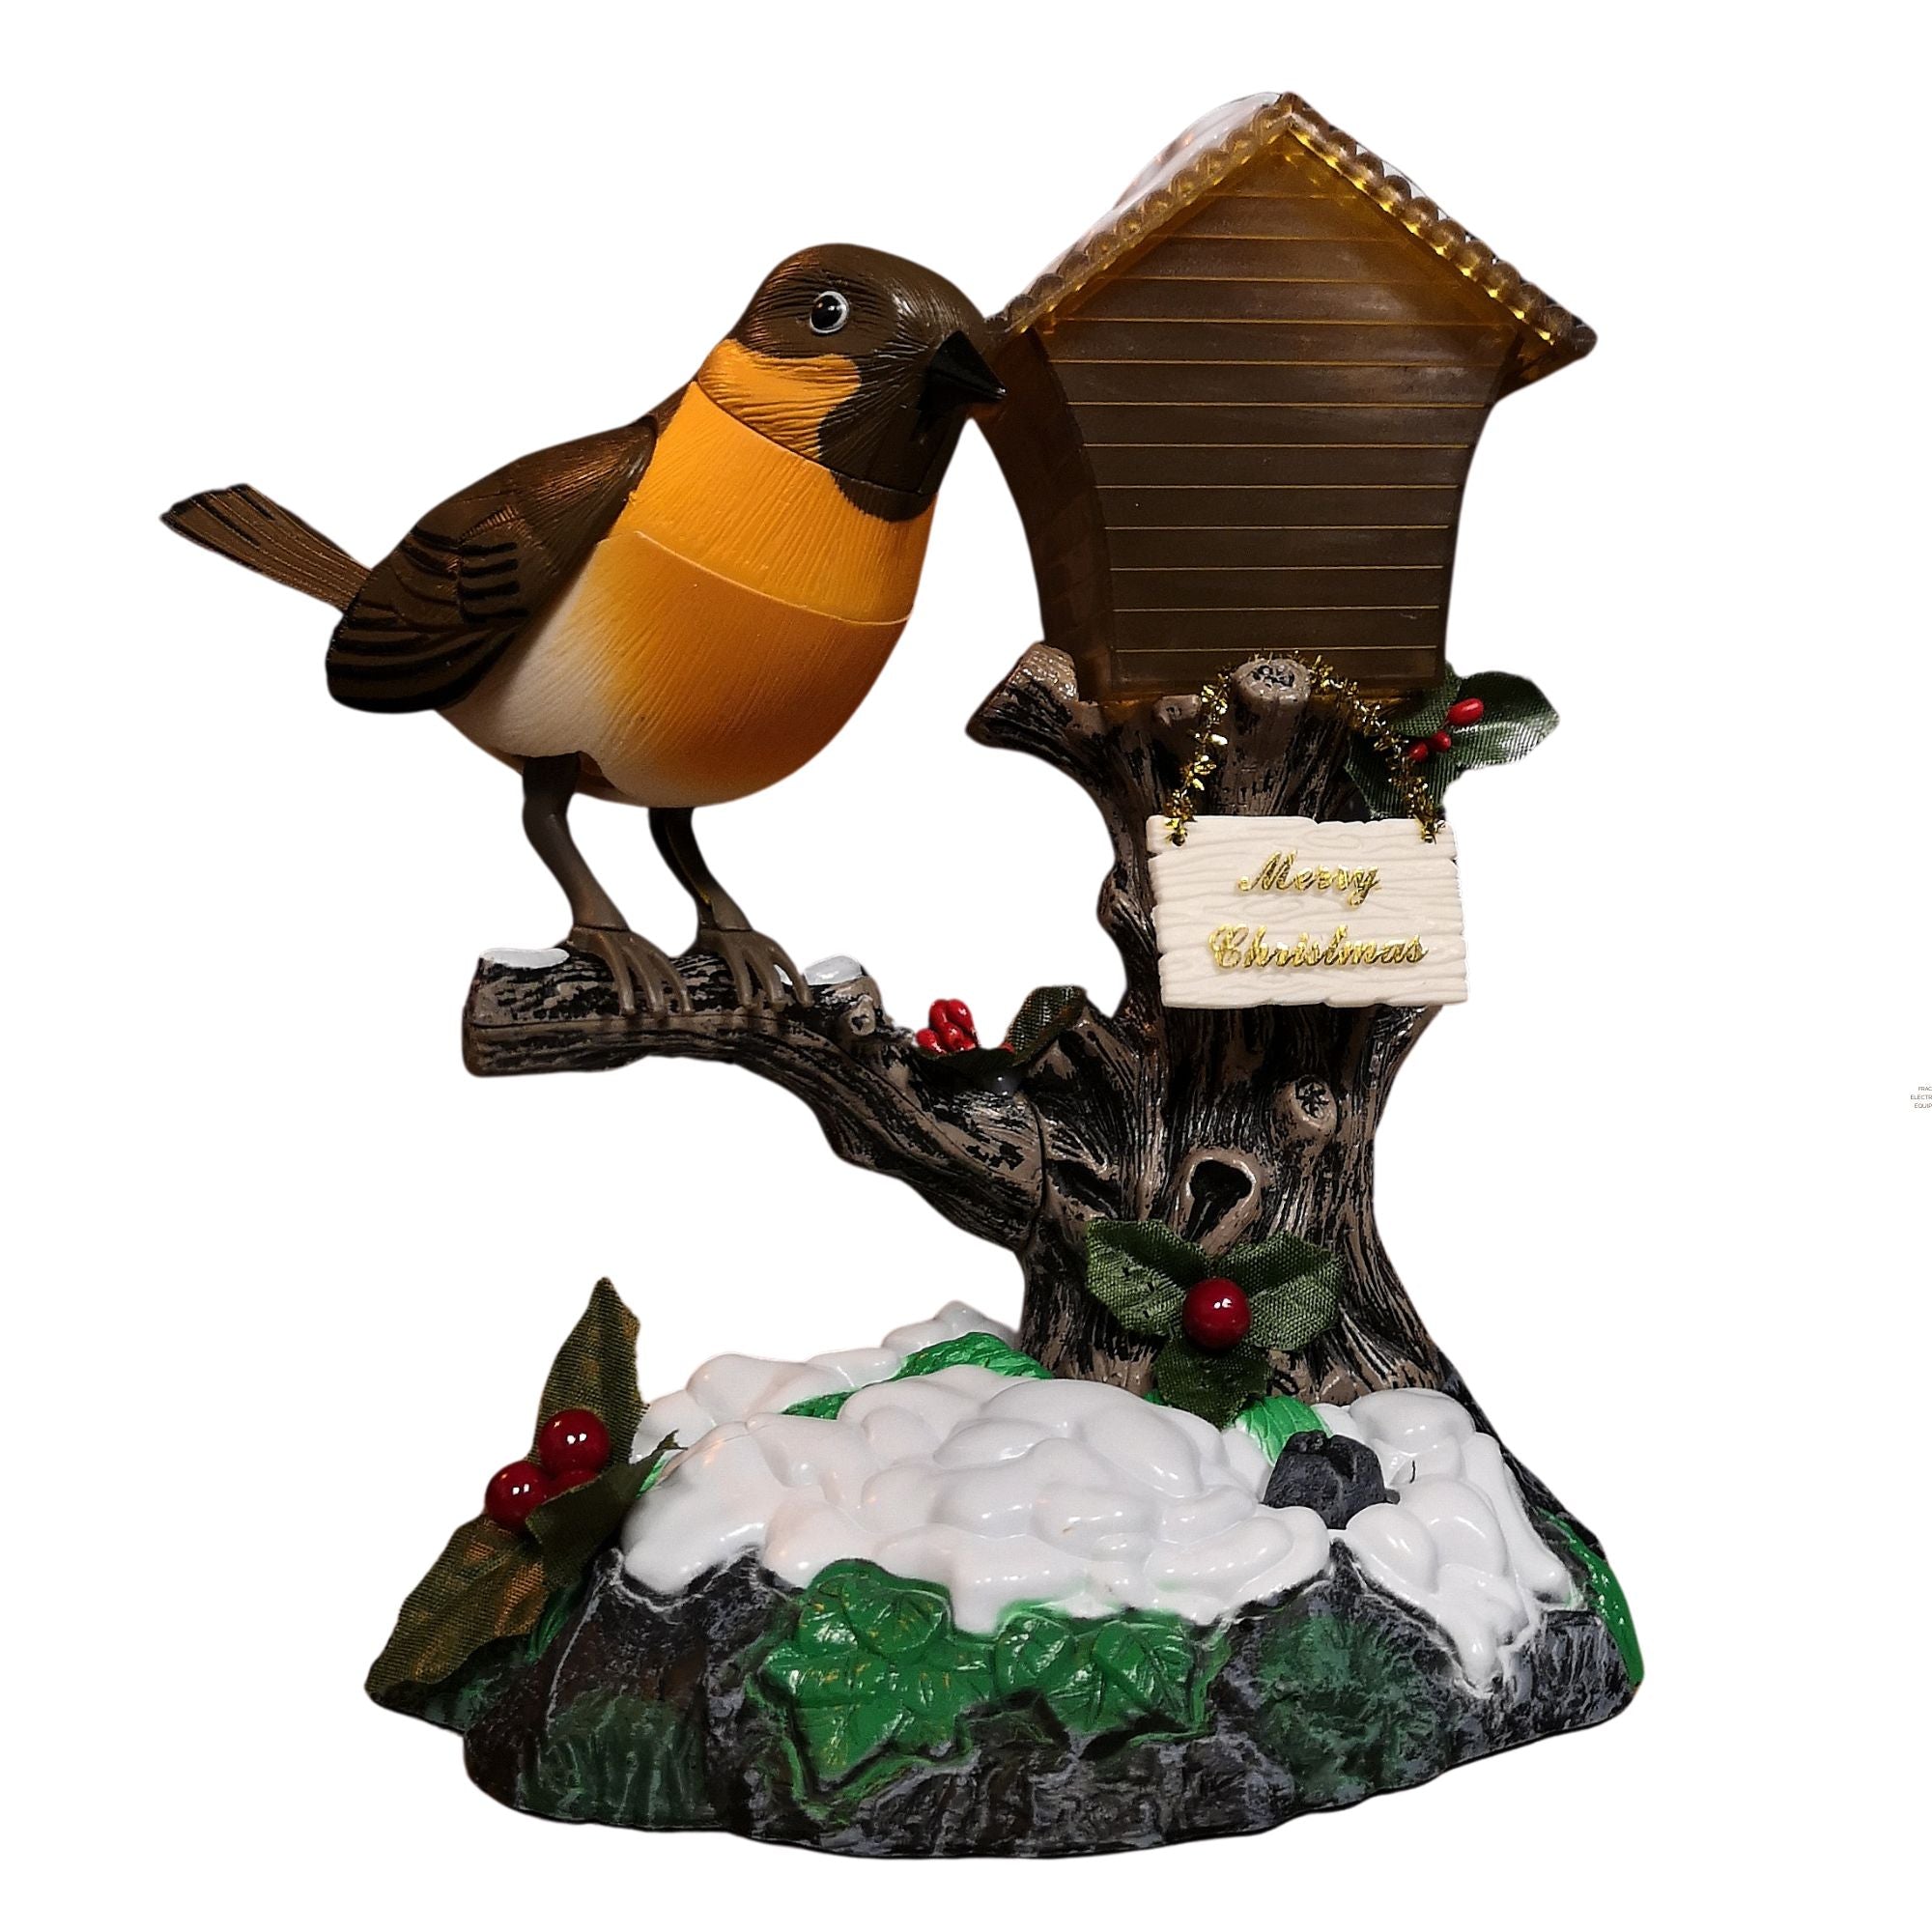 Sound Activated Animated Robin on House Chirps "We Wish You a Merry Christmas"